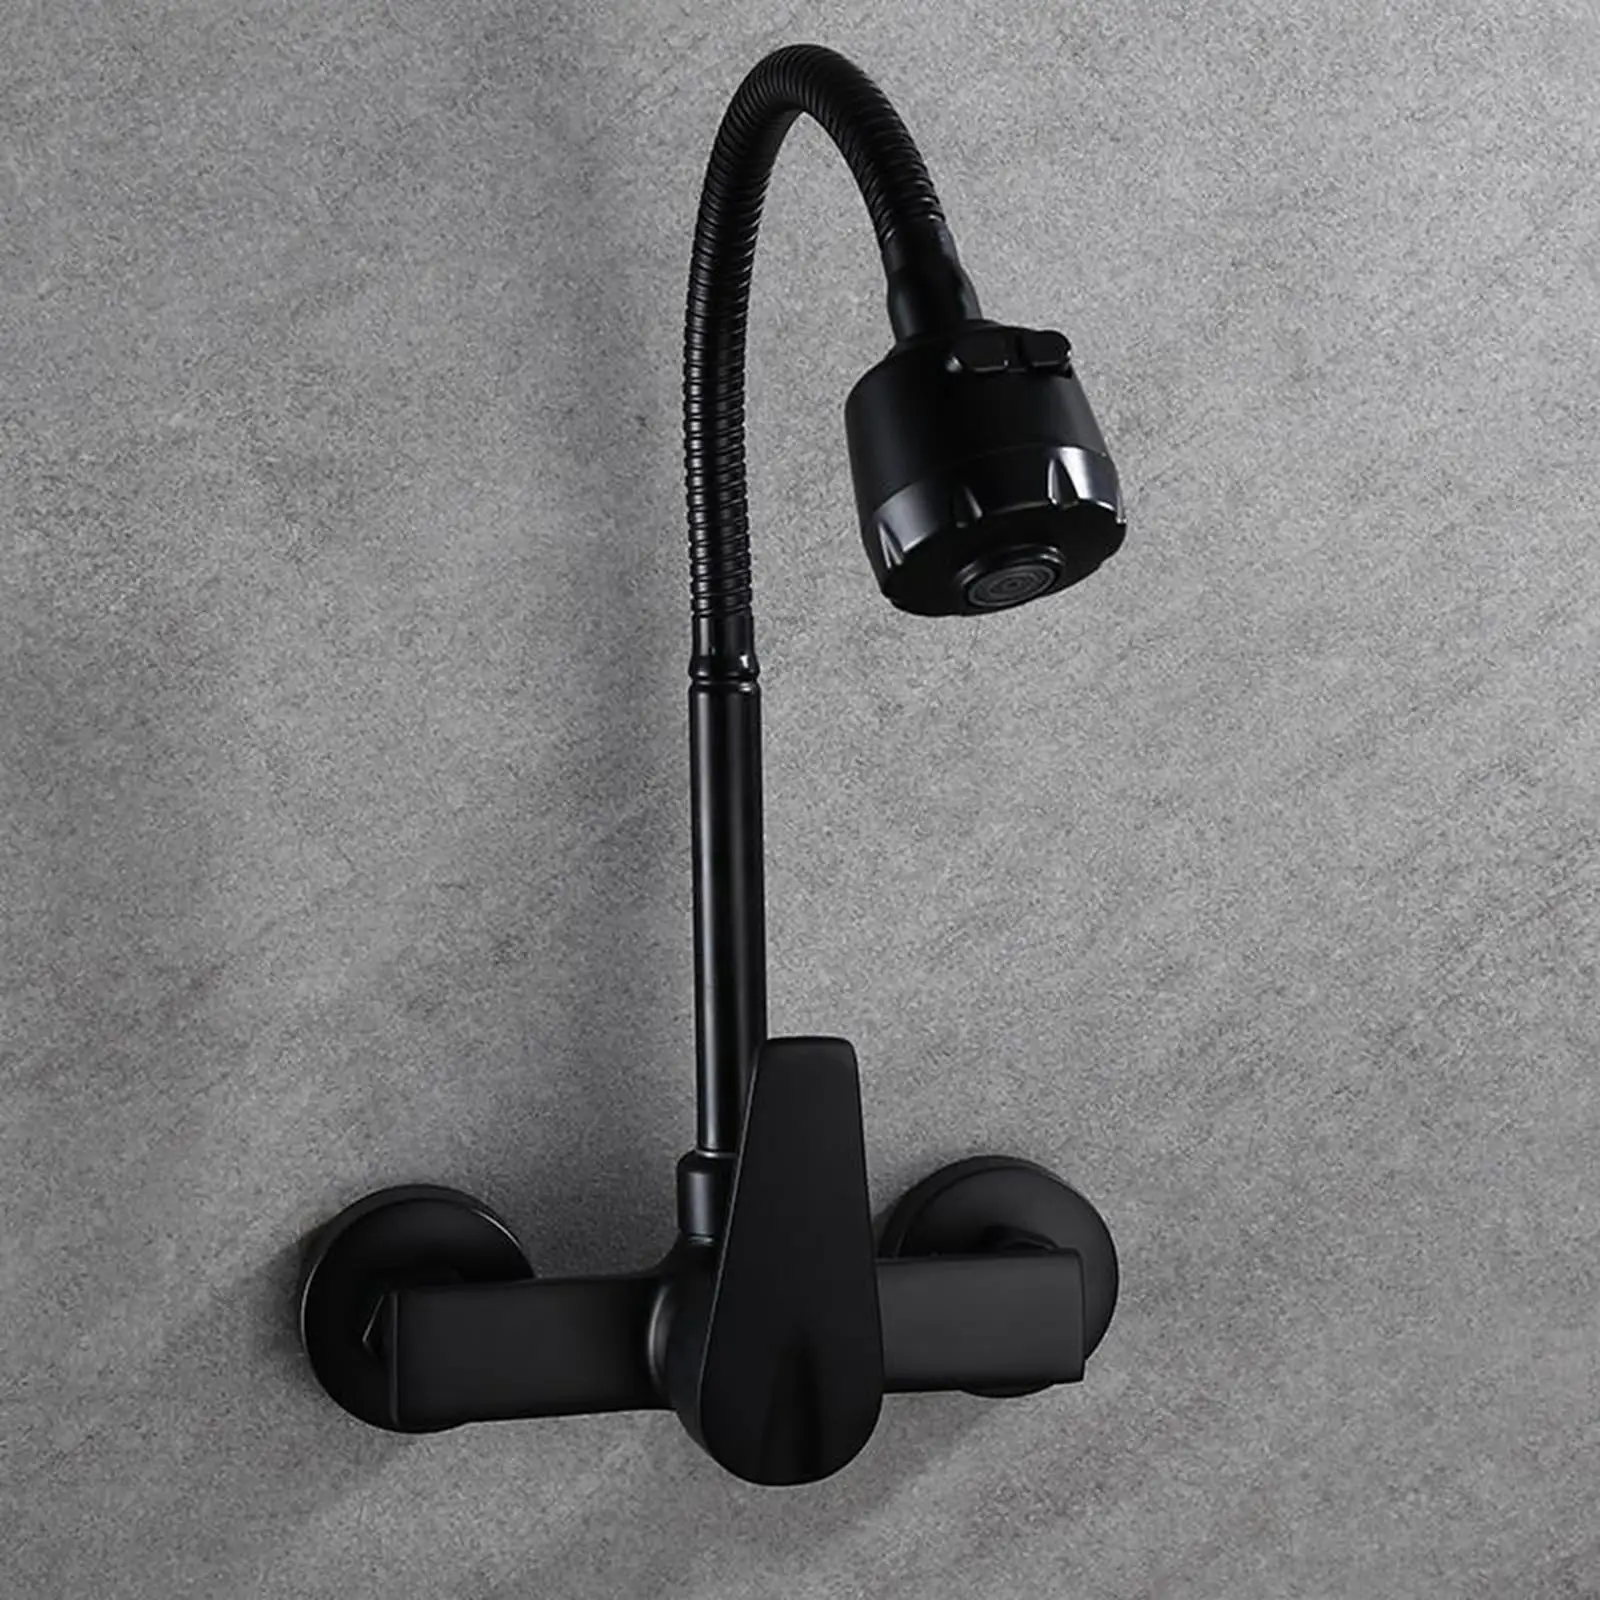 Kitchen Sink Faucet Laundry Faucet Bathroom Faucet High 360 Swivel for Home Sink Kitchen